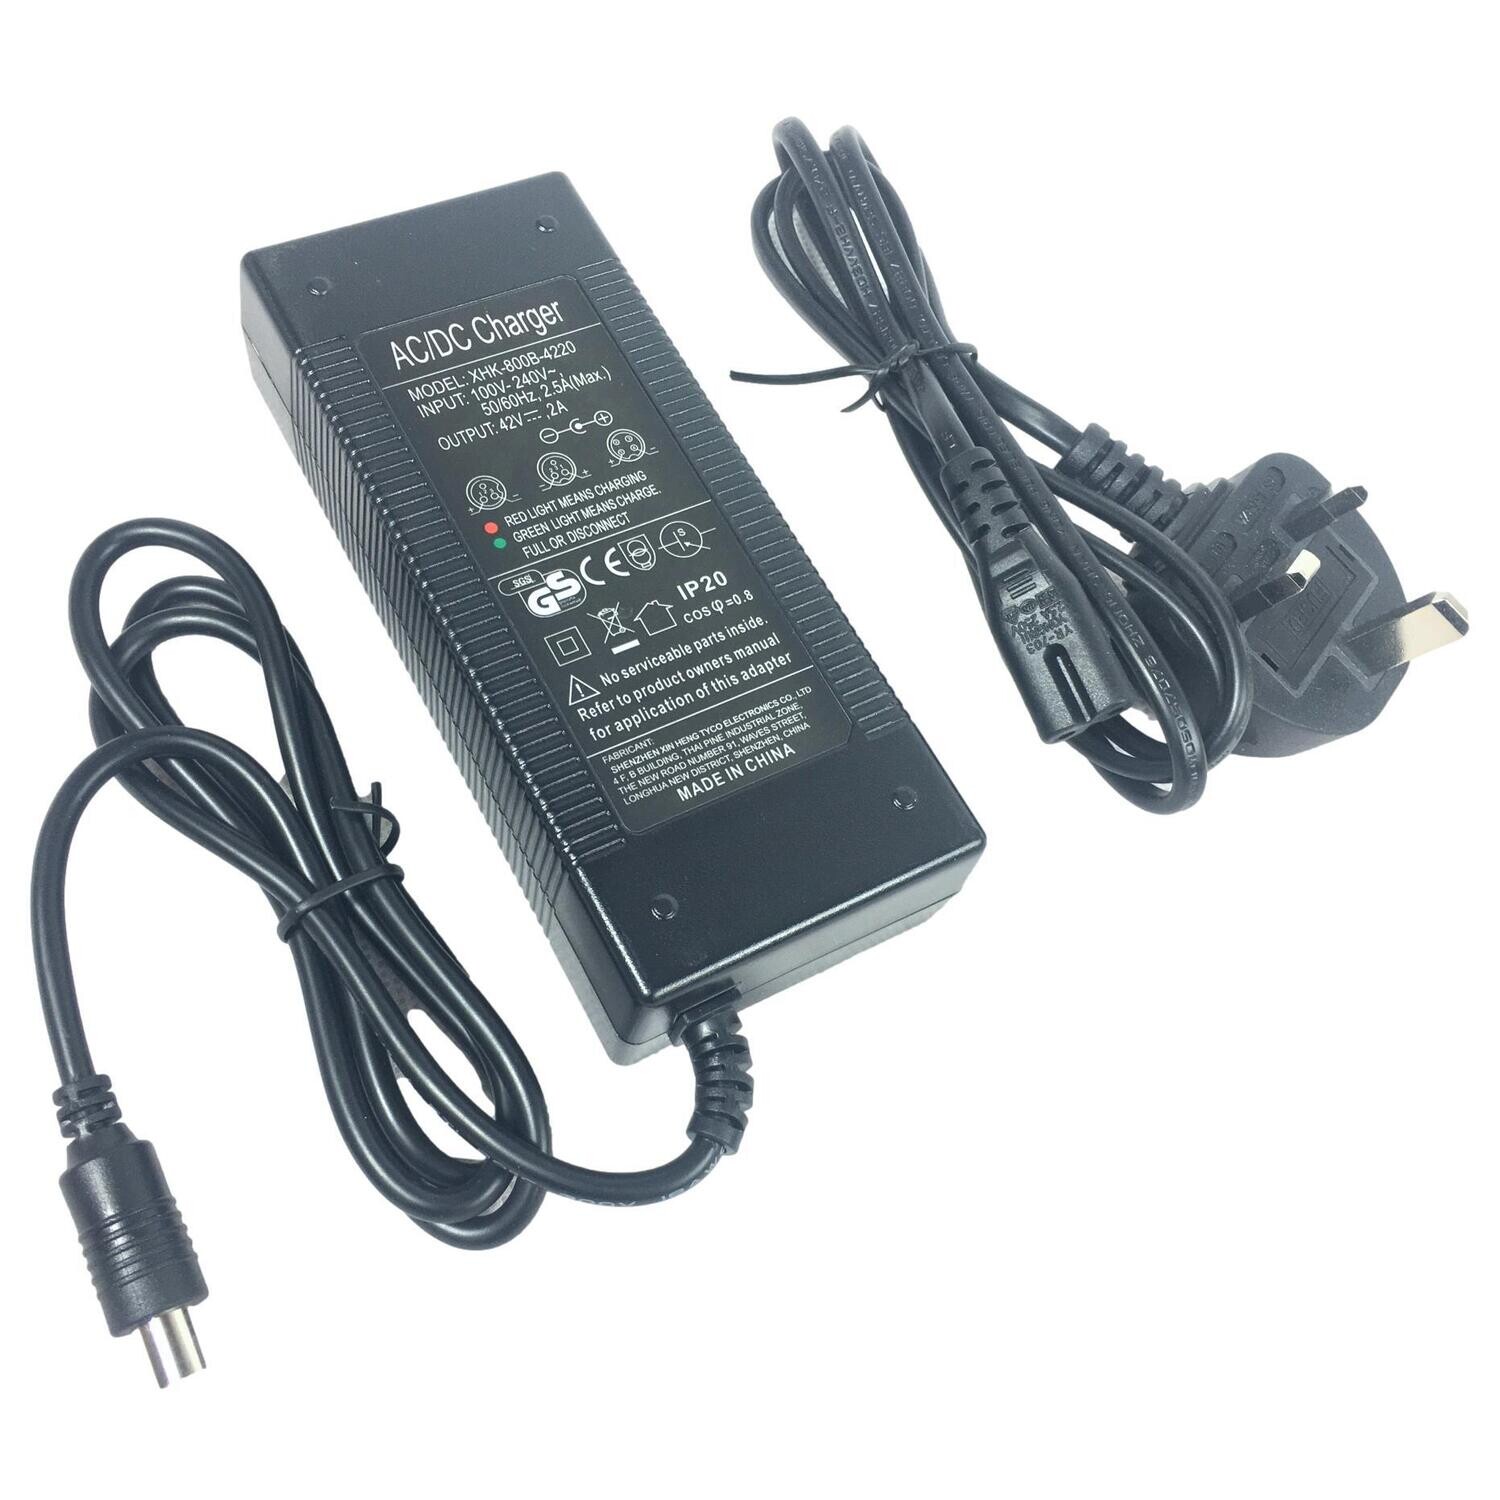 Battery Charger For Ninebot KickScooter ES1LD Max G30 Z10 ONE S2 42V 2A UK Plug